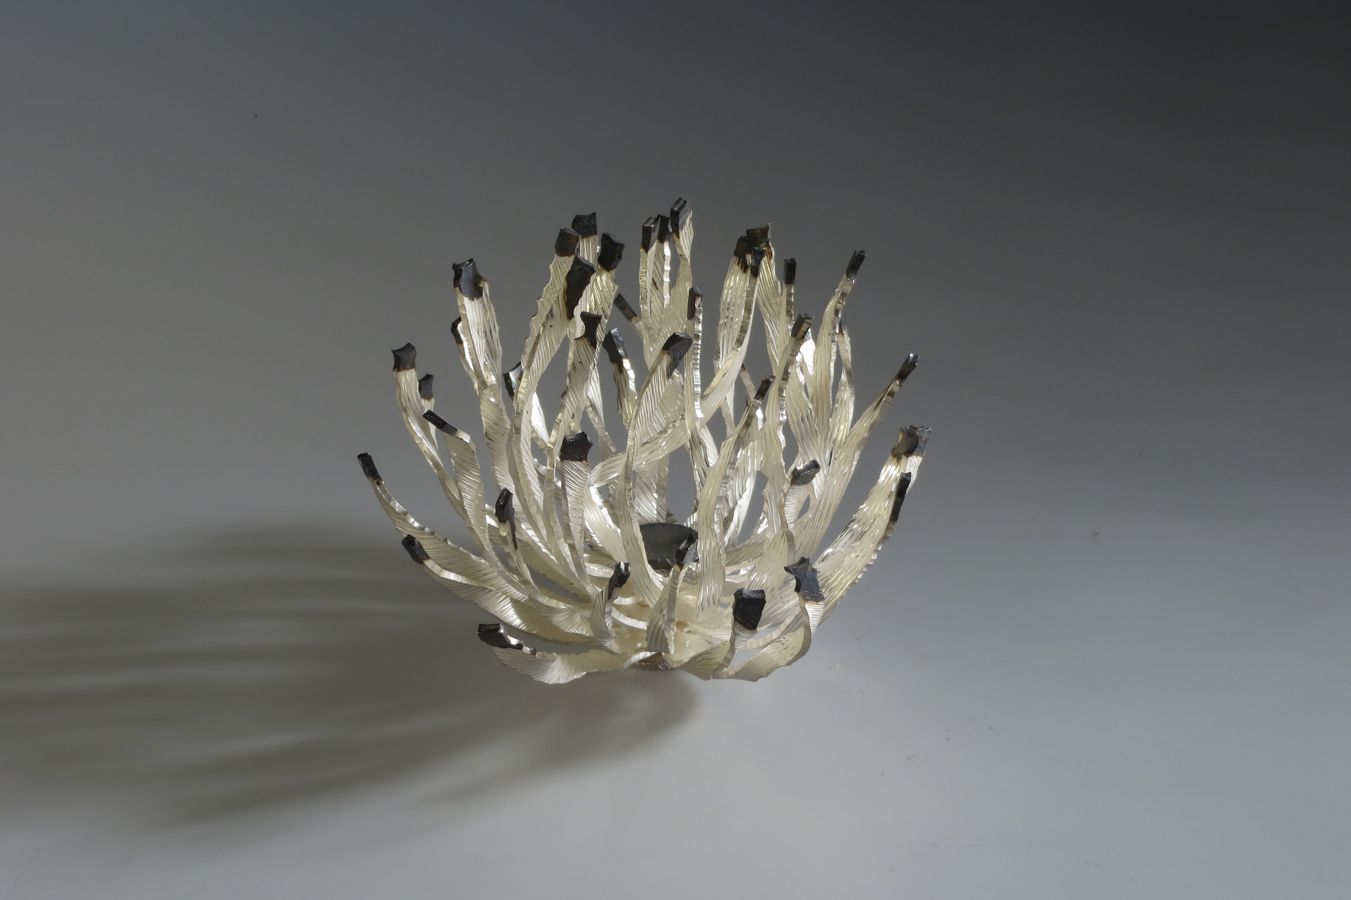 Piece -- materials: silver, partly patinated; dimensions: diameter 11.5 x 9 h cm;